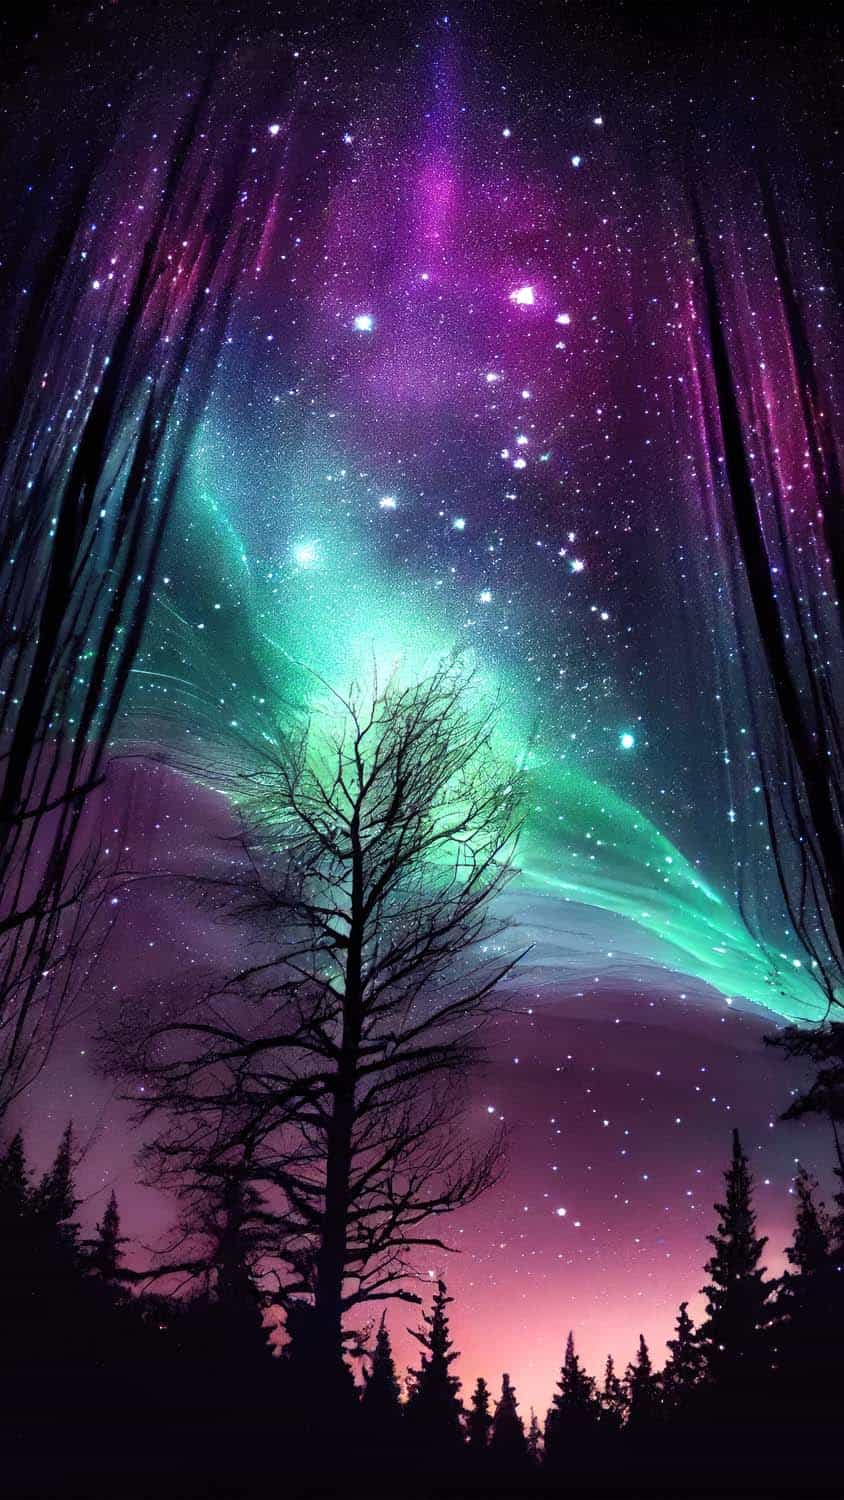 Download wallpaper 950x1534 road mountains aurora borealis nature iphone  950x1534 hd background 6440